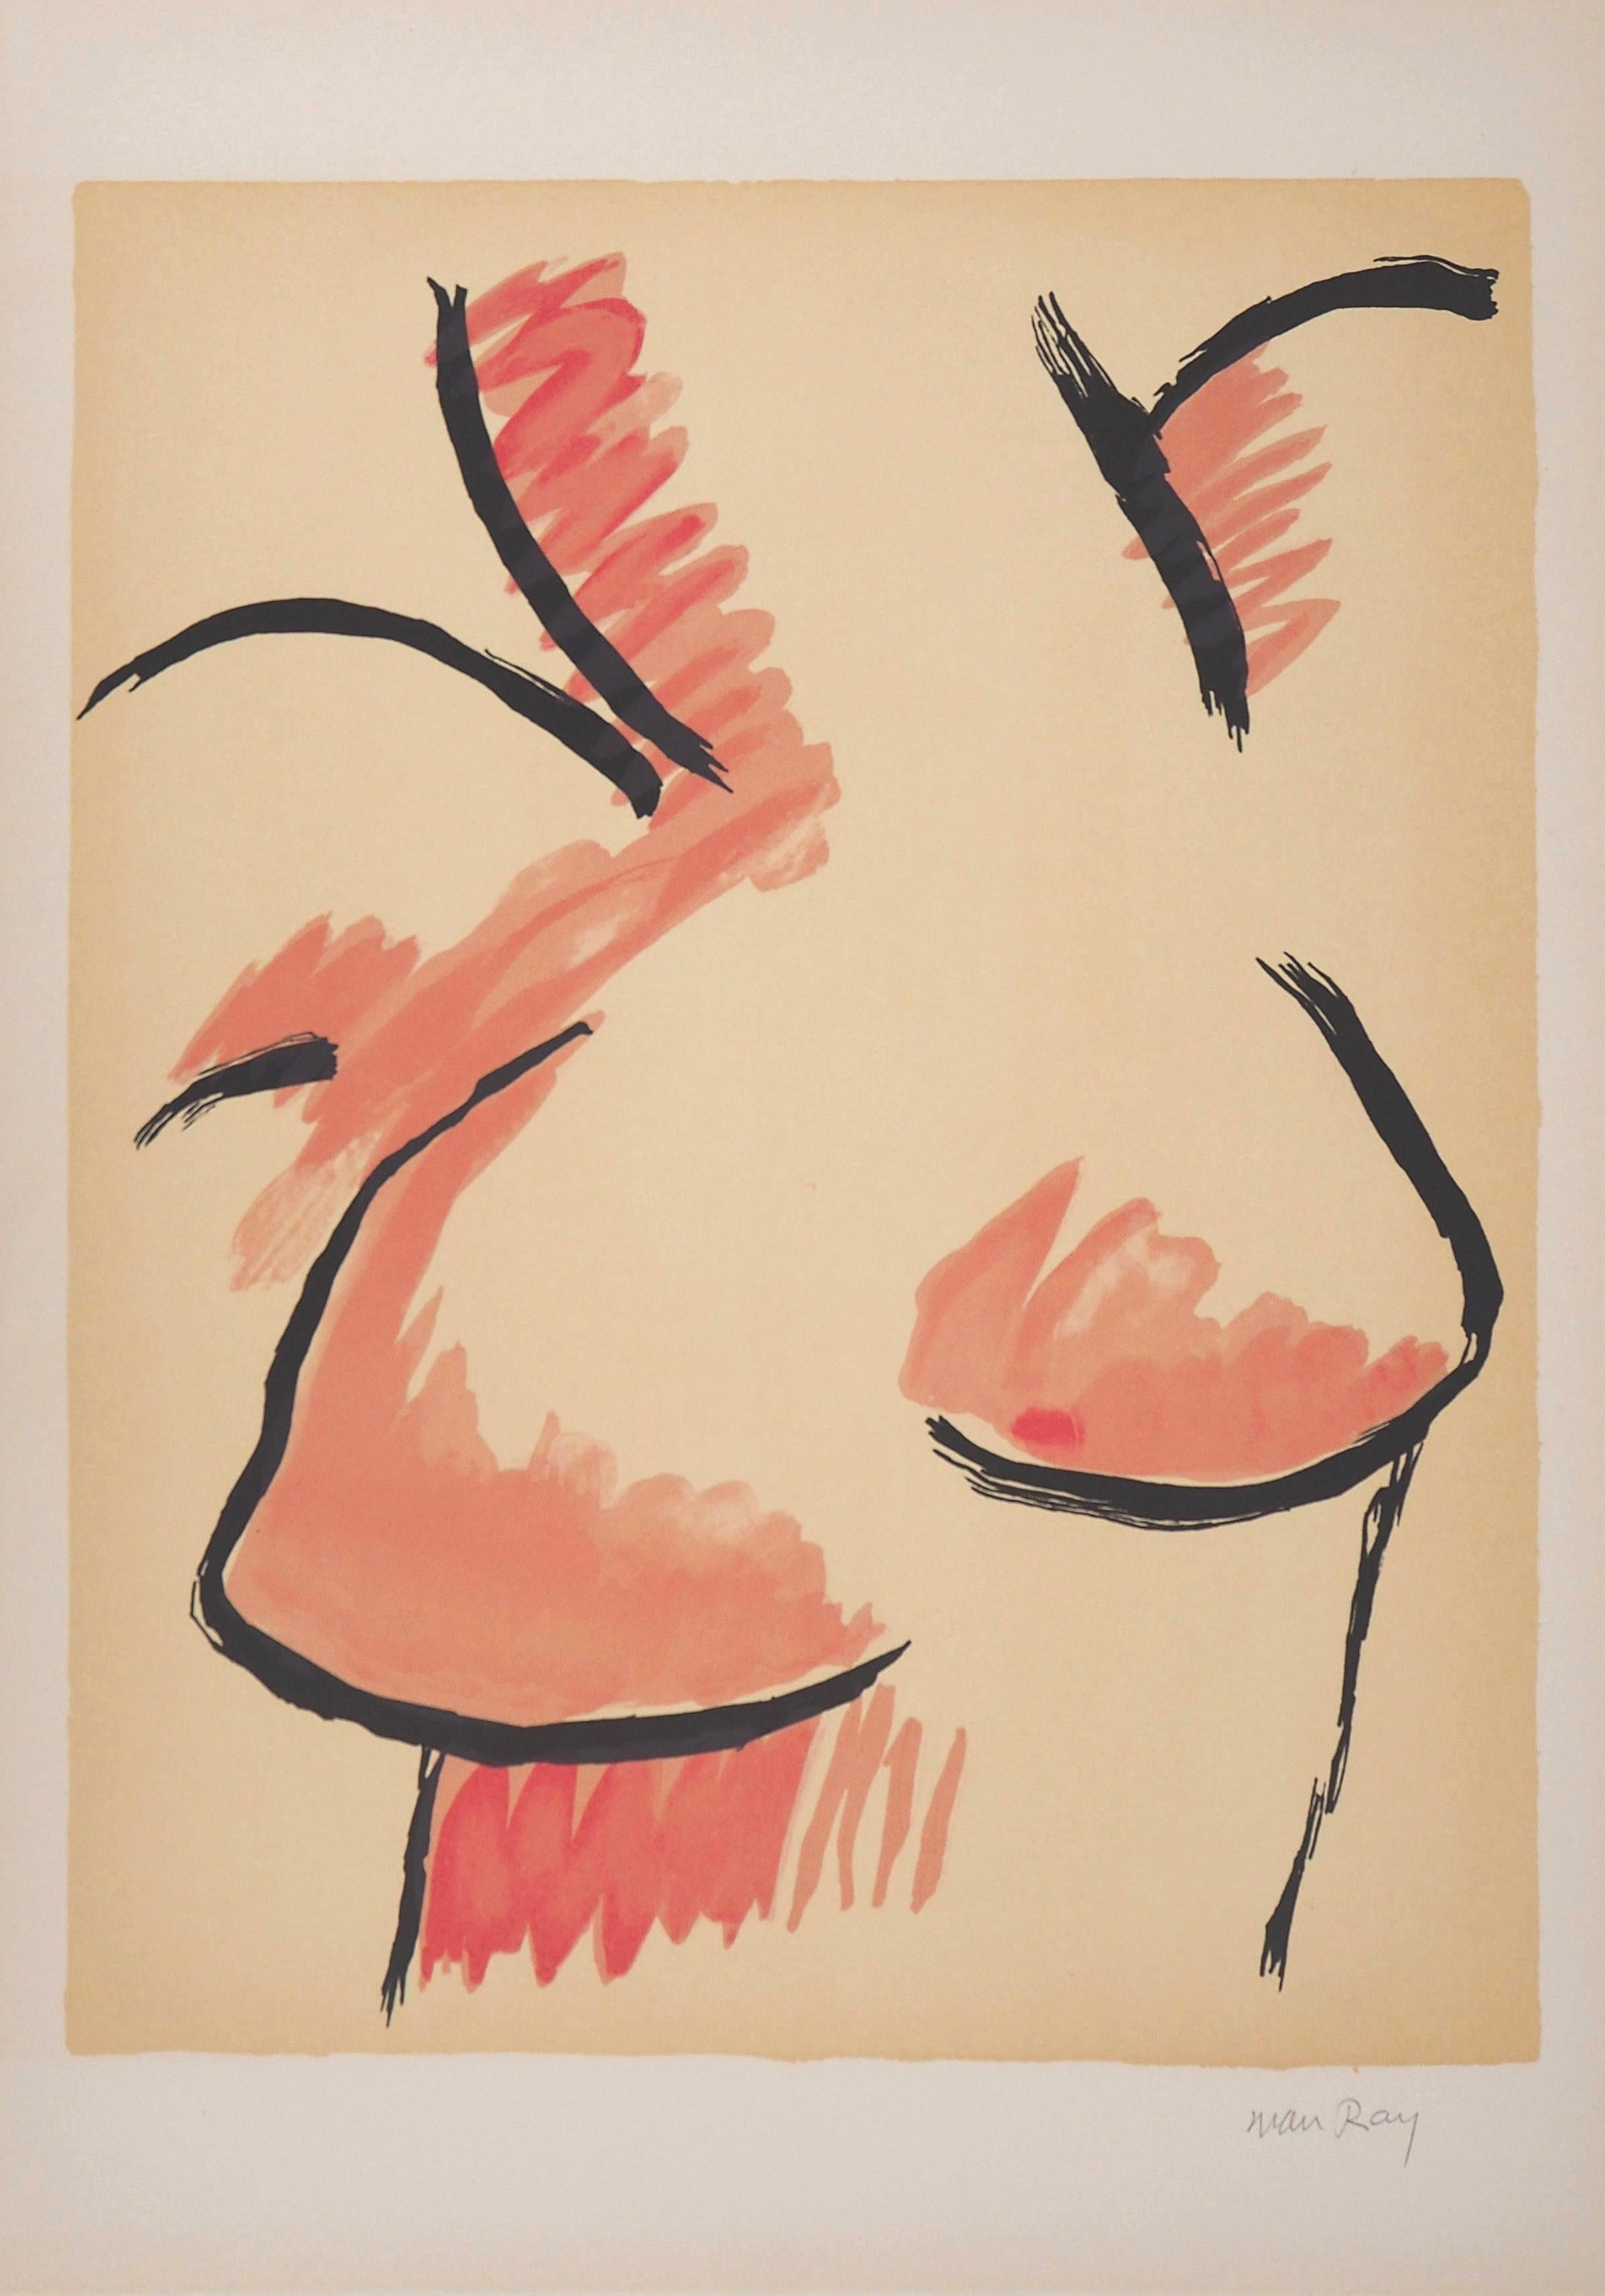 Female Bust - Handsigned Original Lithograph - Beige Figurative Print by Man Ray